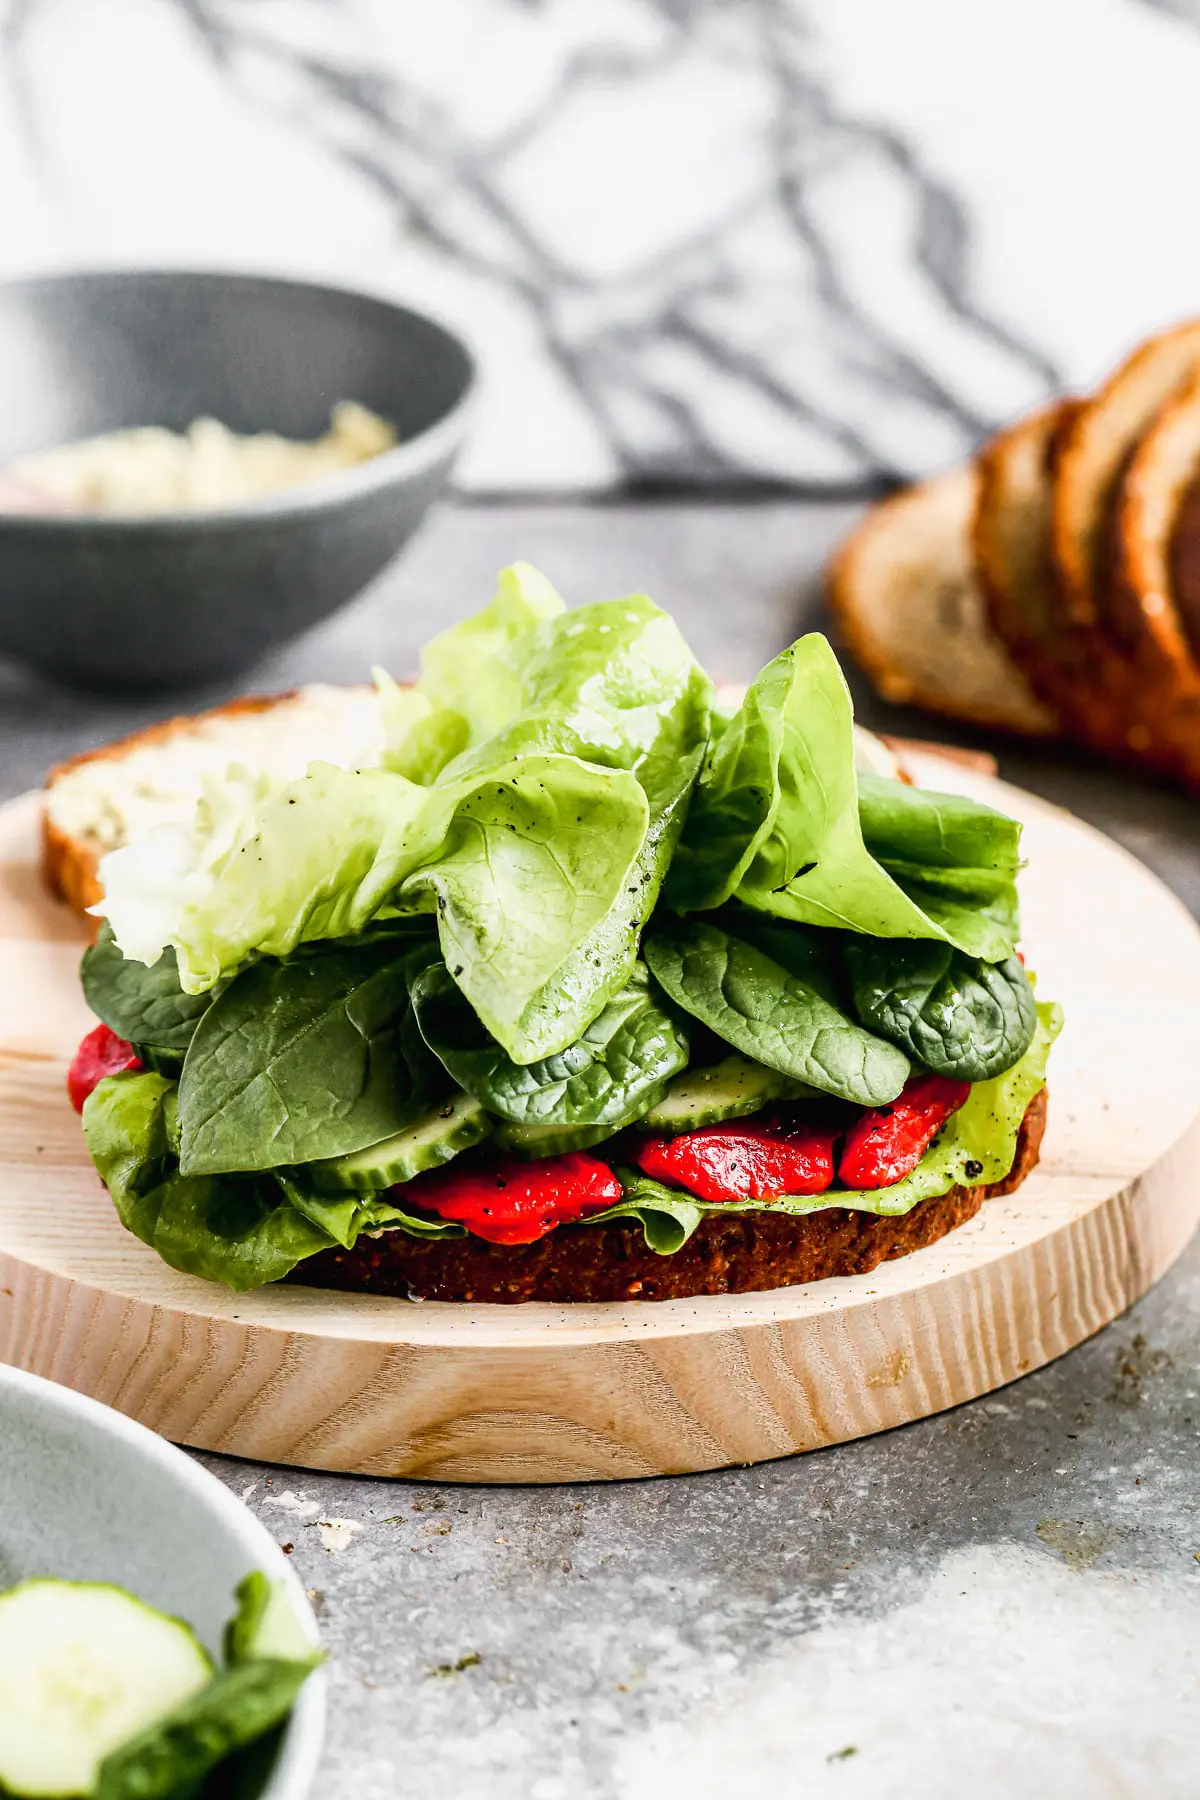 Our take on a classic Cucumber Sandwich includes layers of hearty spinach, vinaigrette-dressed butter lettuce, smoky roasted red peppers, and the pièce de résistance, a pistachio-infused goat cheese that will make you weak in the knees. The perfect lunch to prep early and enjoy all week long.&nbsp;